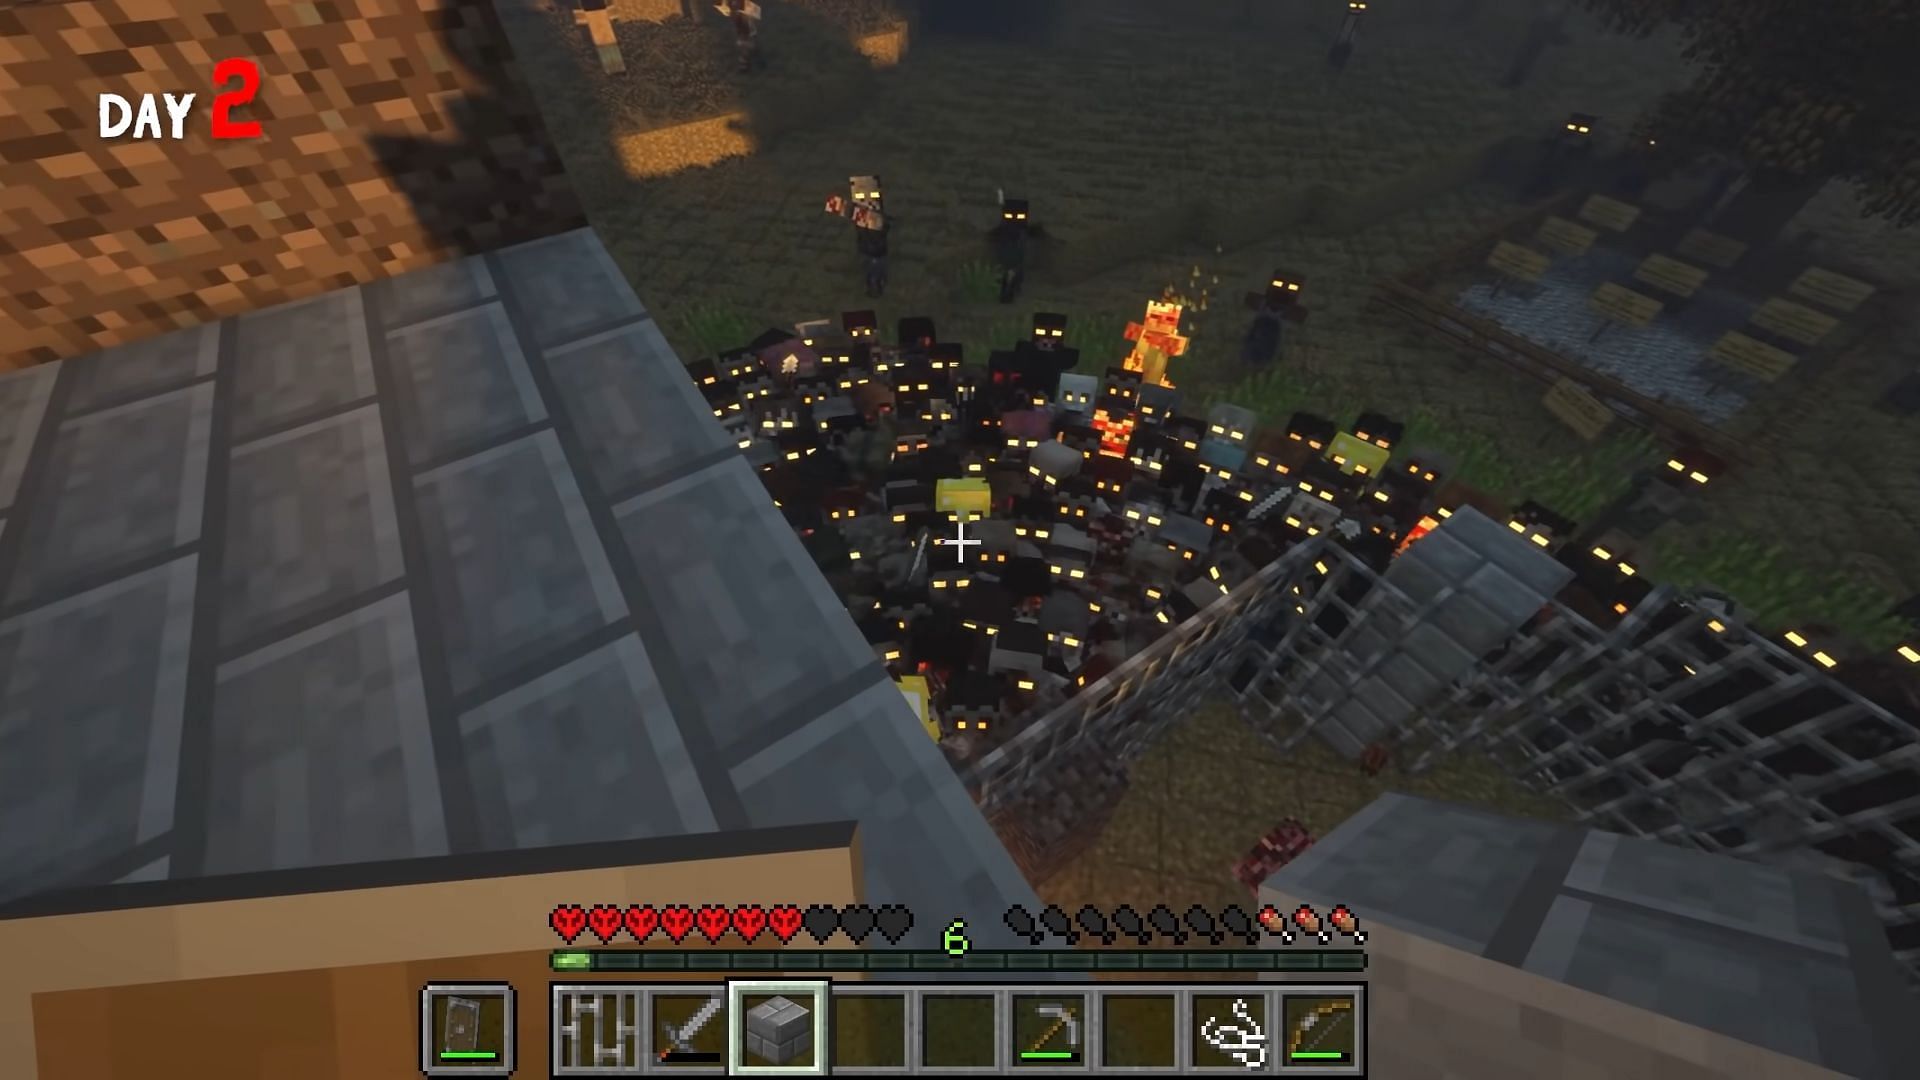 Mustard Virus turns Minecraft into a world devastated by the ravenous infected (Image via Forge Labs/YouTube)